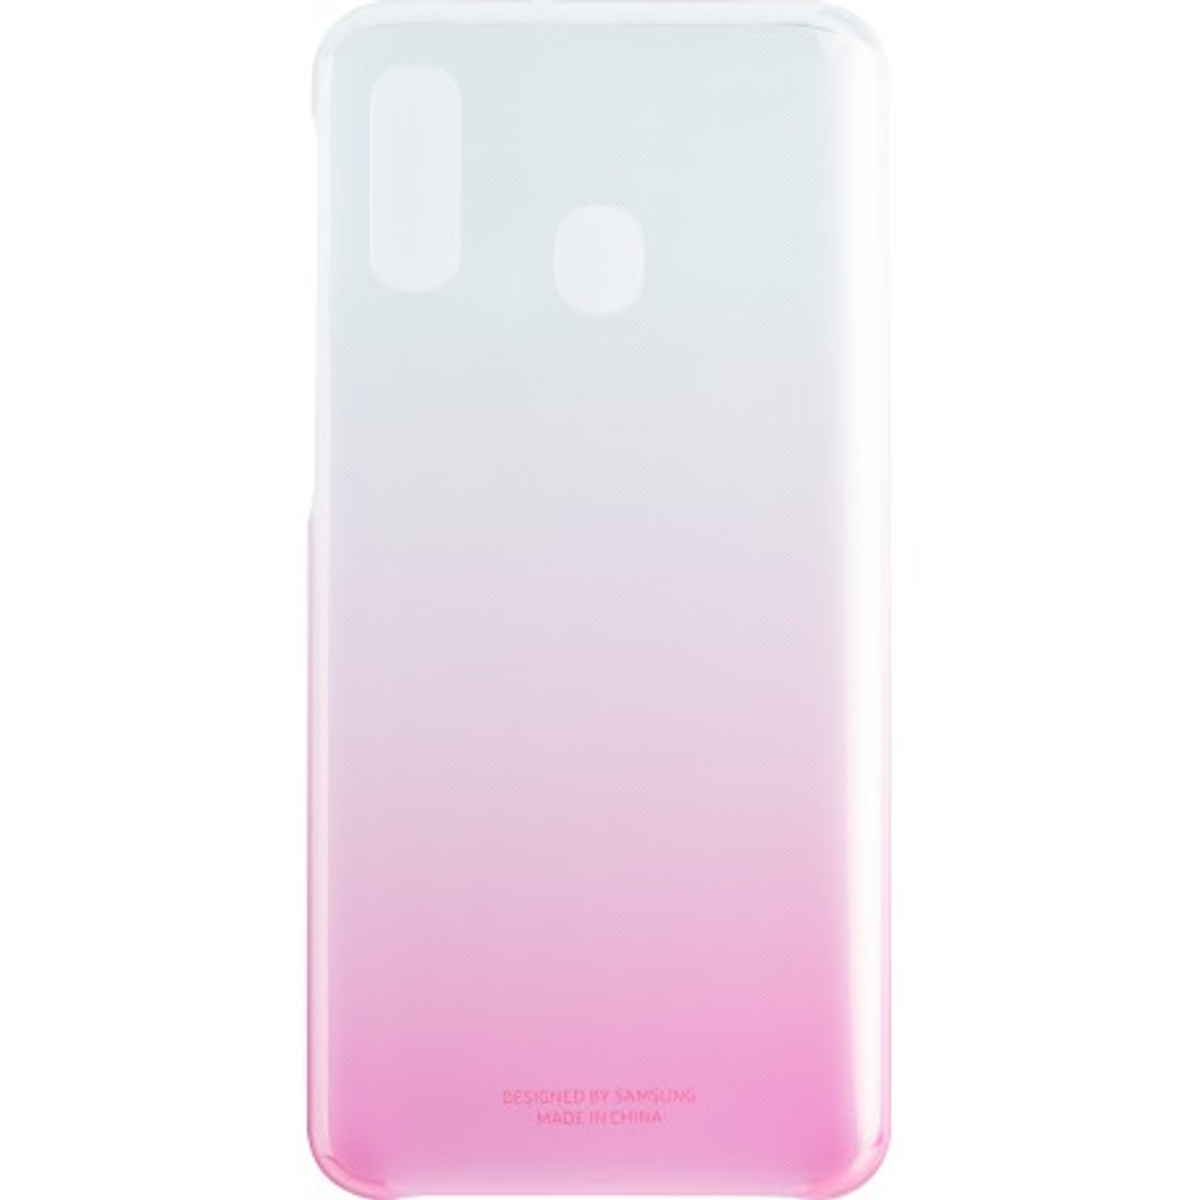 COVER PINK, Galaxy GAL. SAMSUNG Samsung, A40, A40 Backcover, GRADATION EF-AA405CPEGWW Pink